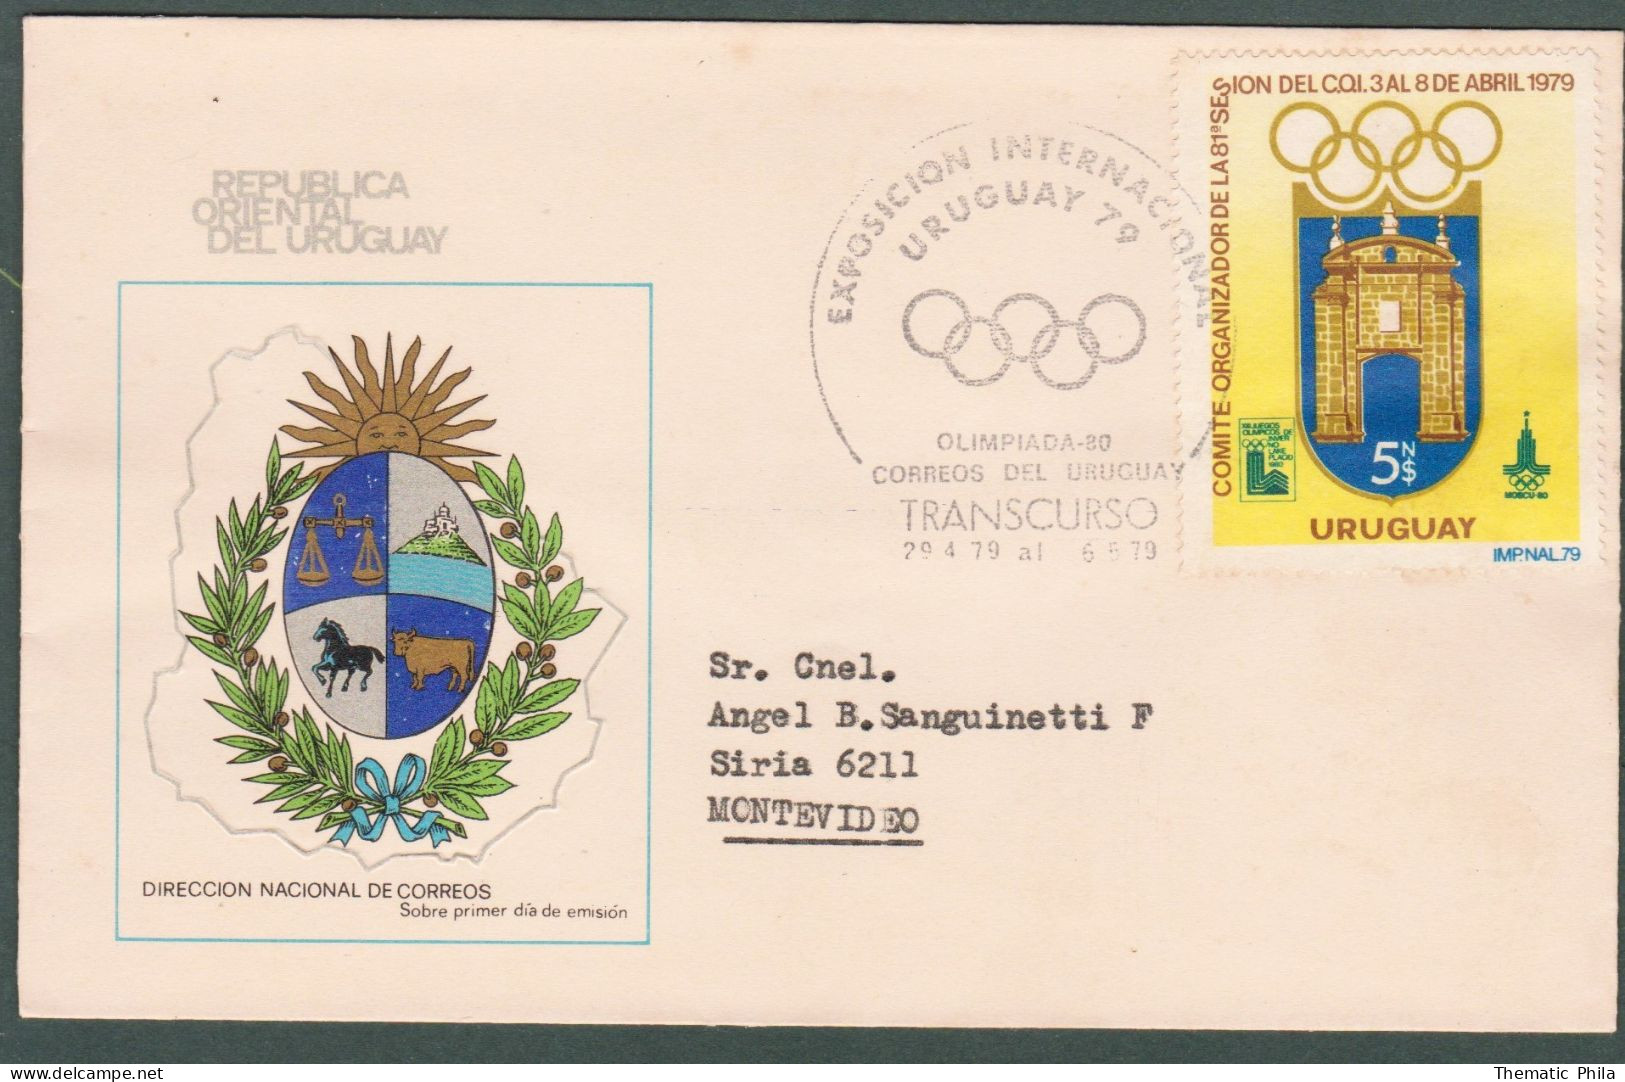 1979 URUGUAY Special Postmark Transcurso Expo International Olympic Games -Comité International Olympique Moscu 80 - Inverno1980: Lake Placid